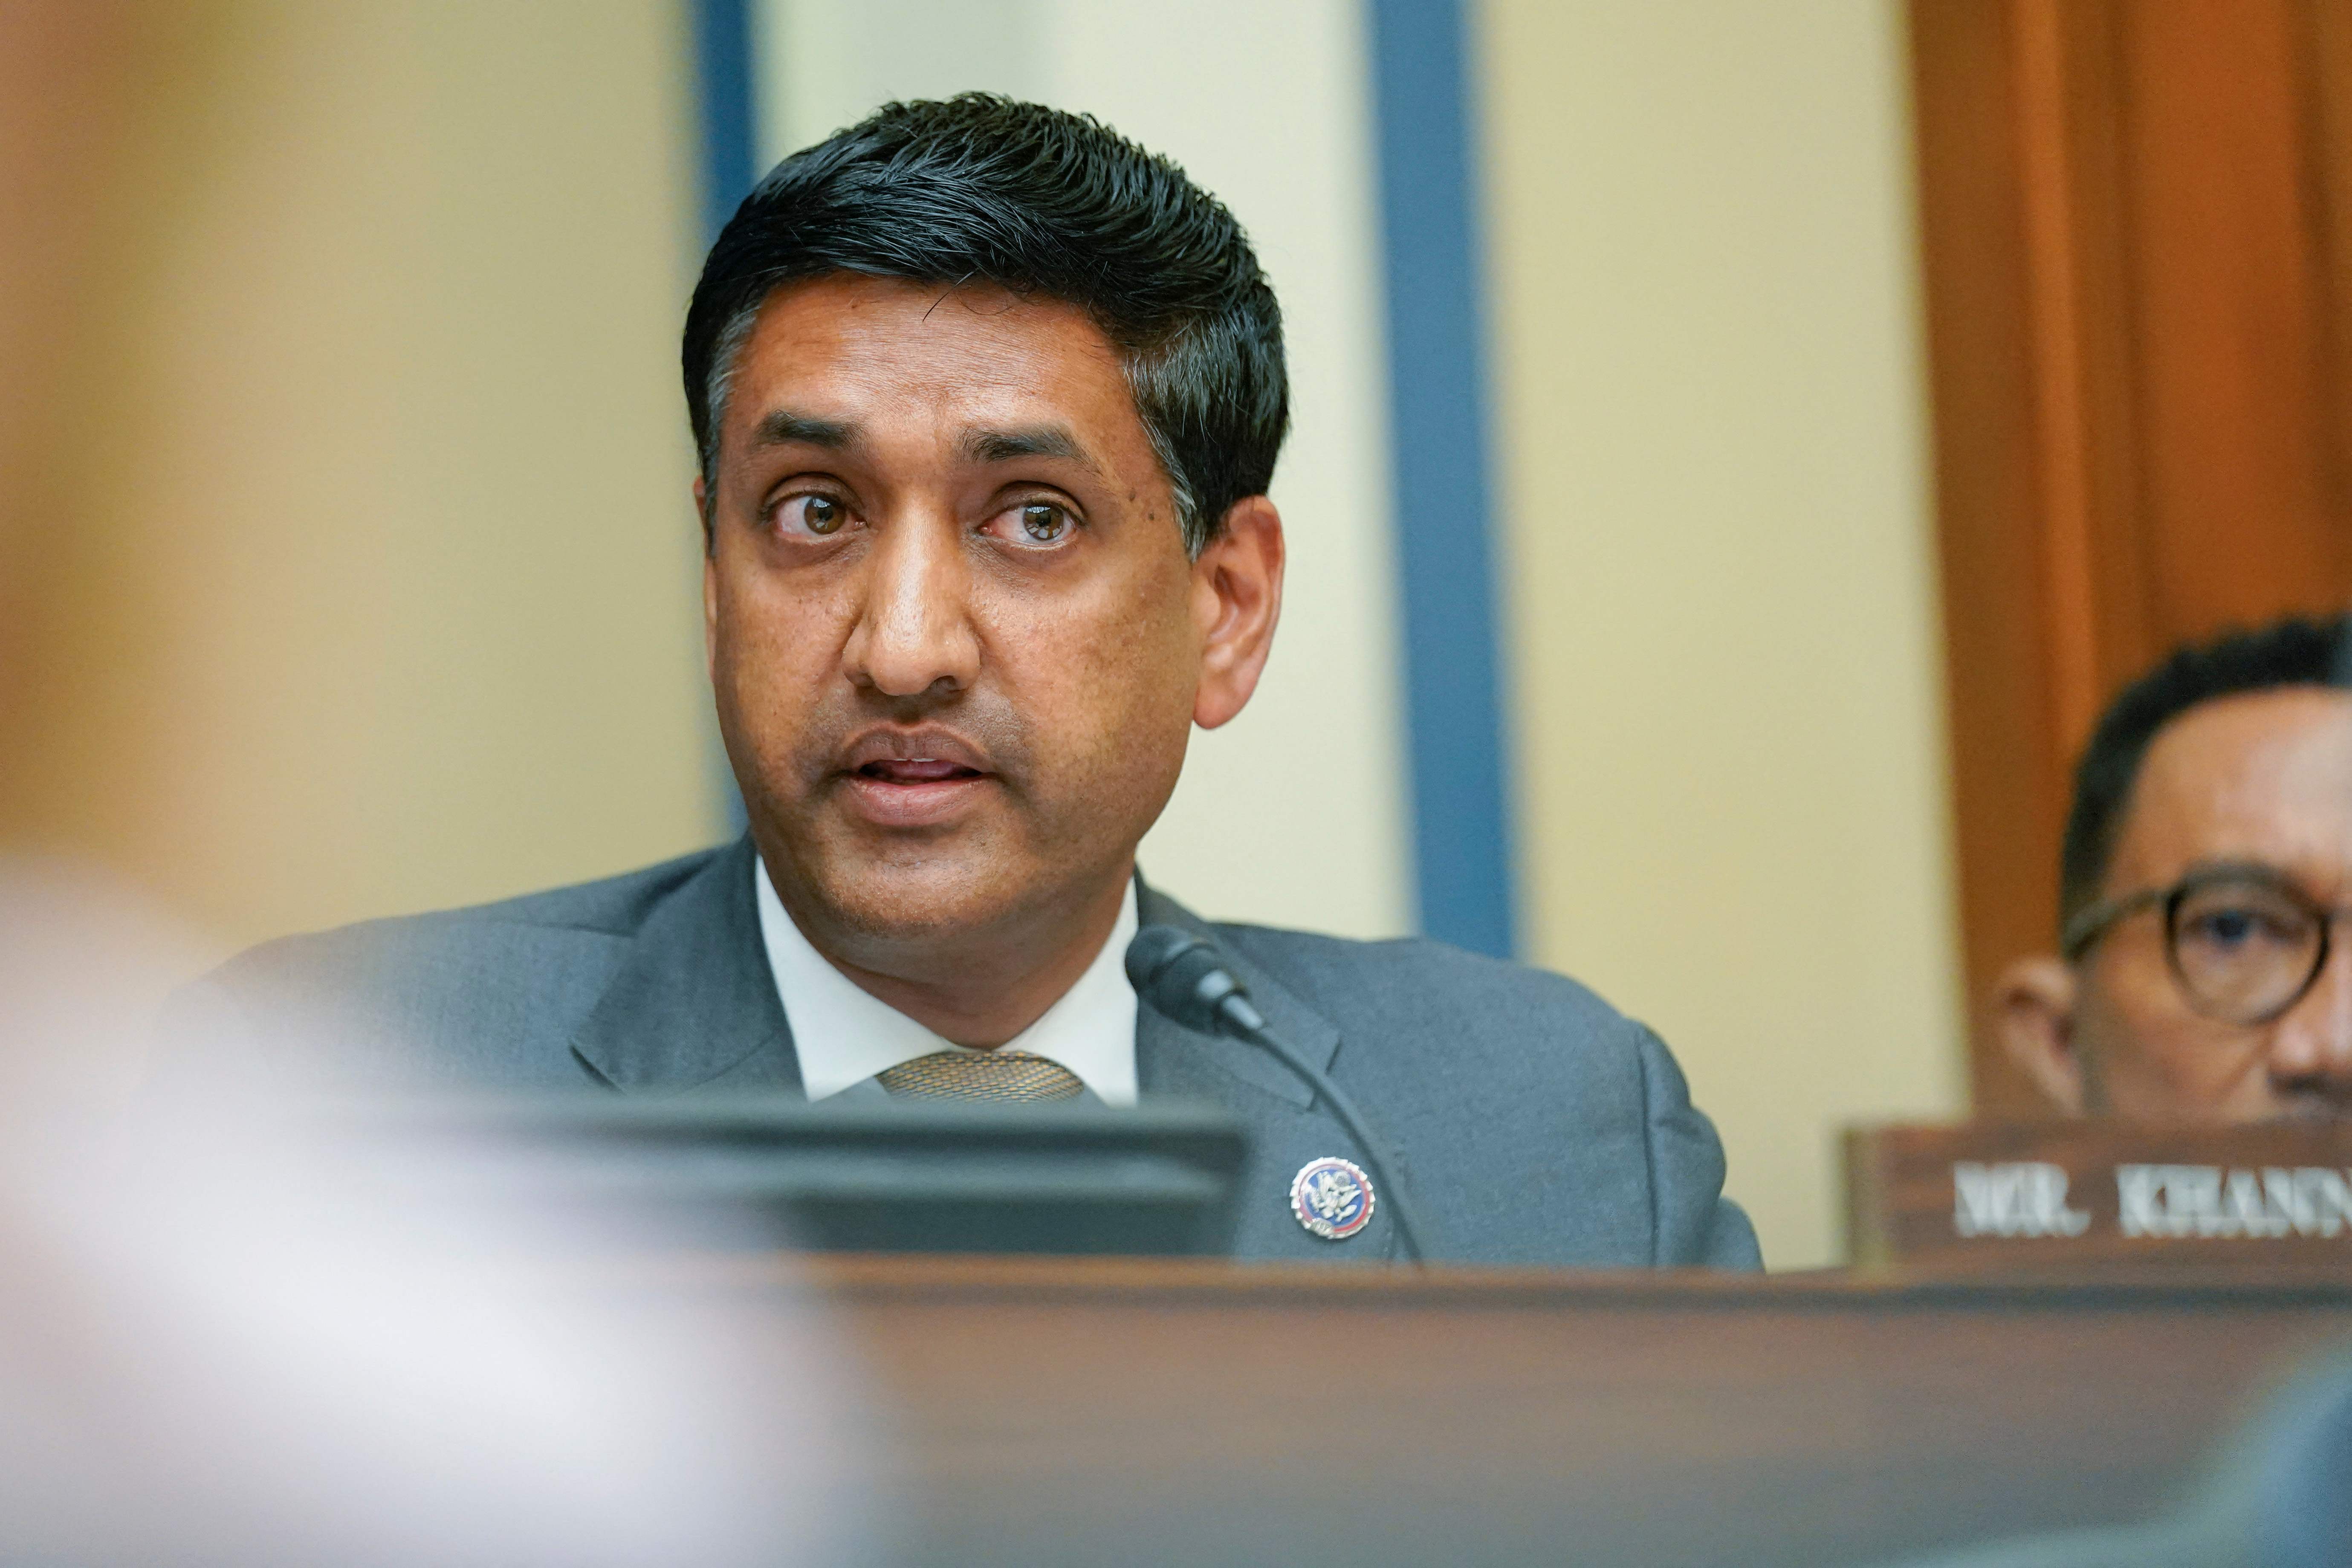 Rep. Ro Khanna, D-Calif., speaks during a House Committee on Oversight and Reform hearing on gun violence on Capitol Hill in Washington, DC, on June 8, 2022